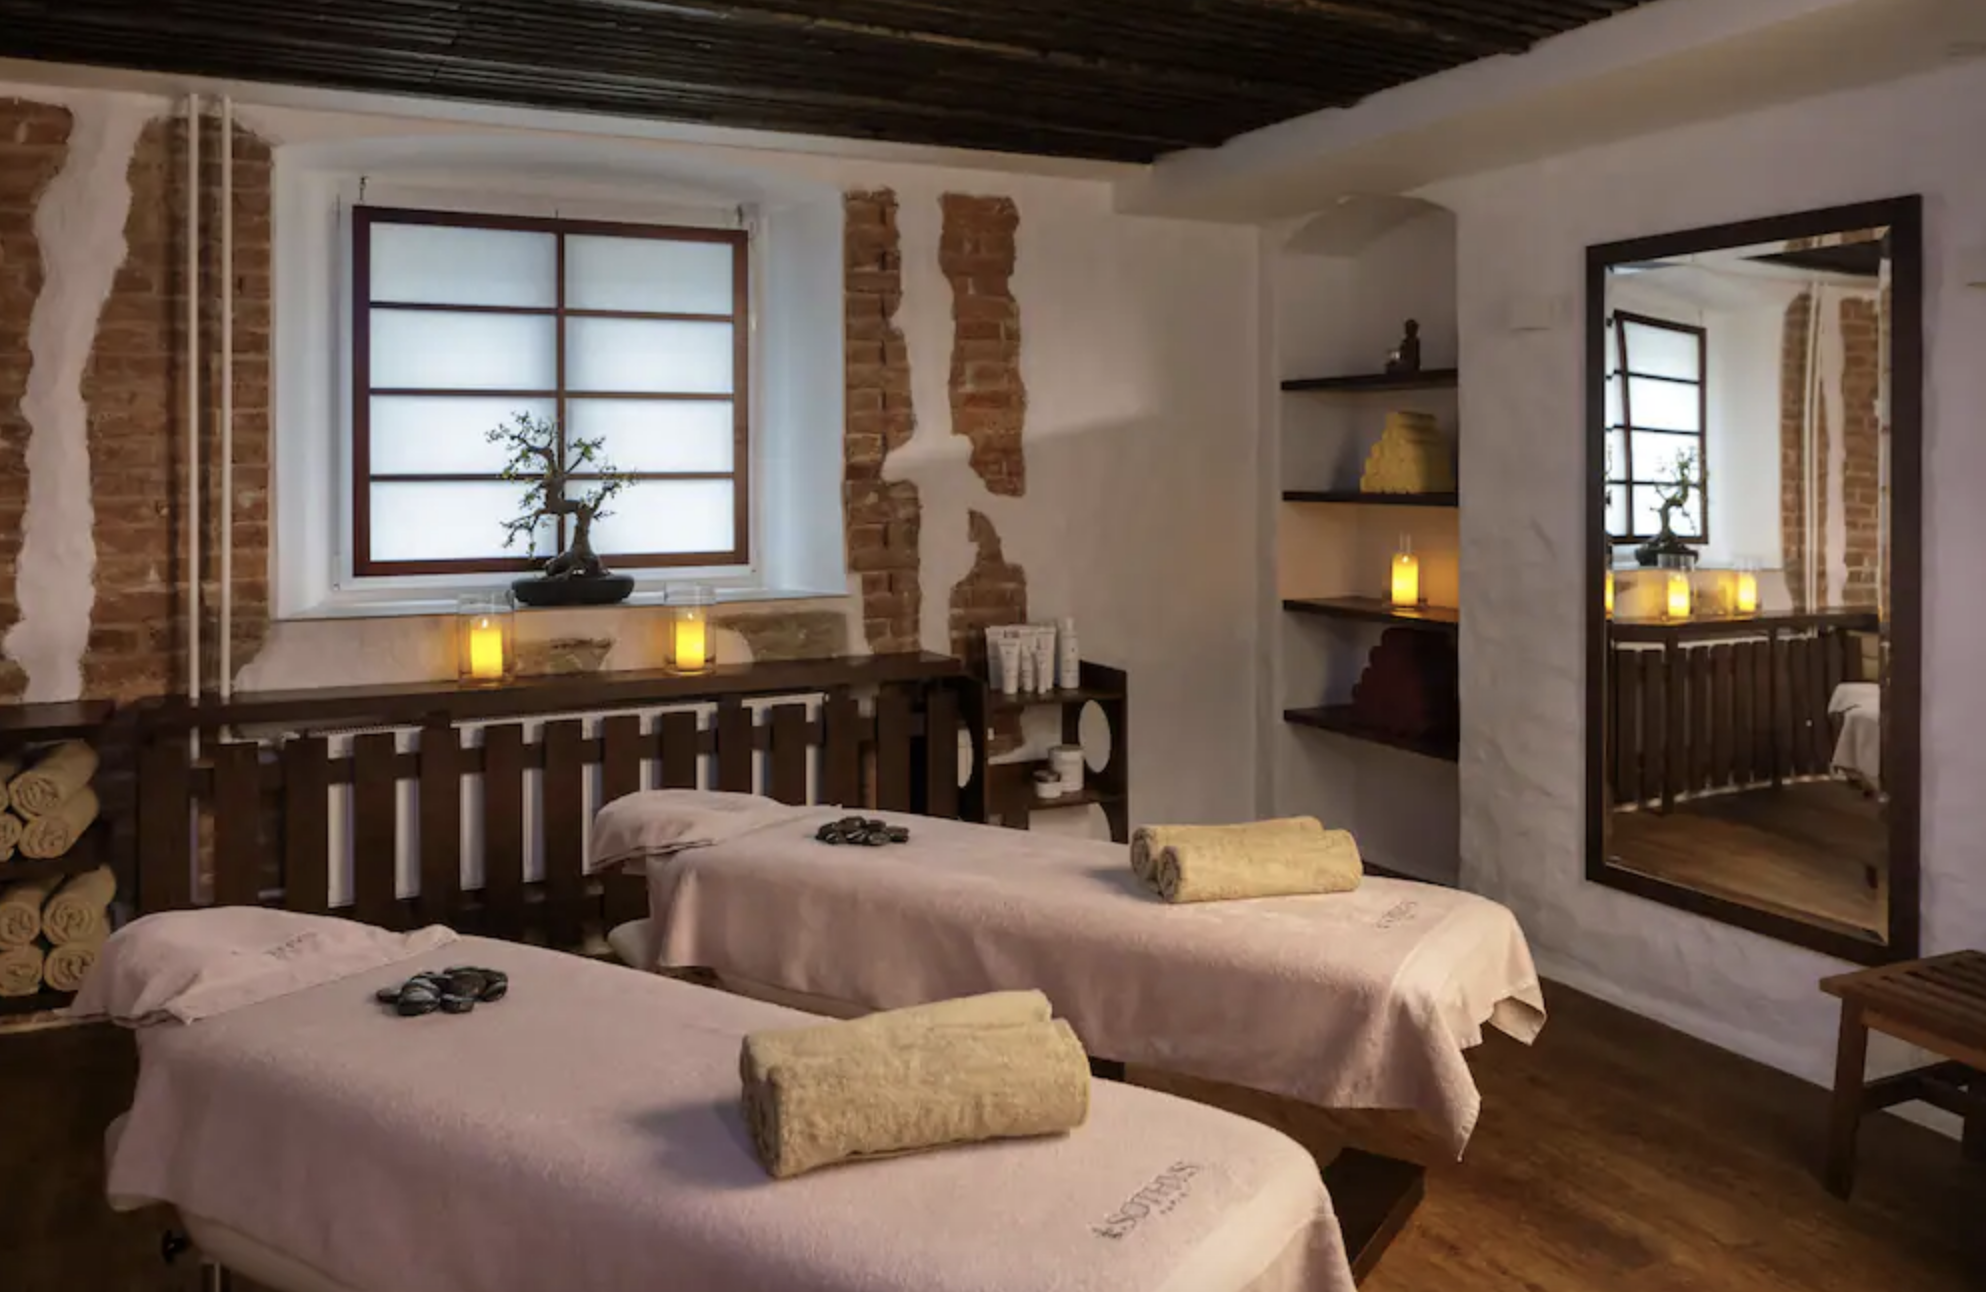 A cozy spa room lit by candles and featuring historic-looking wood ceilings and exposed brick walls